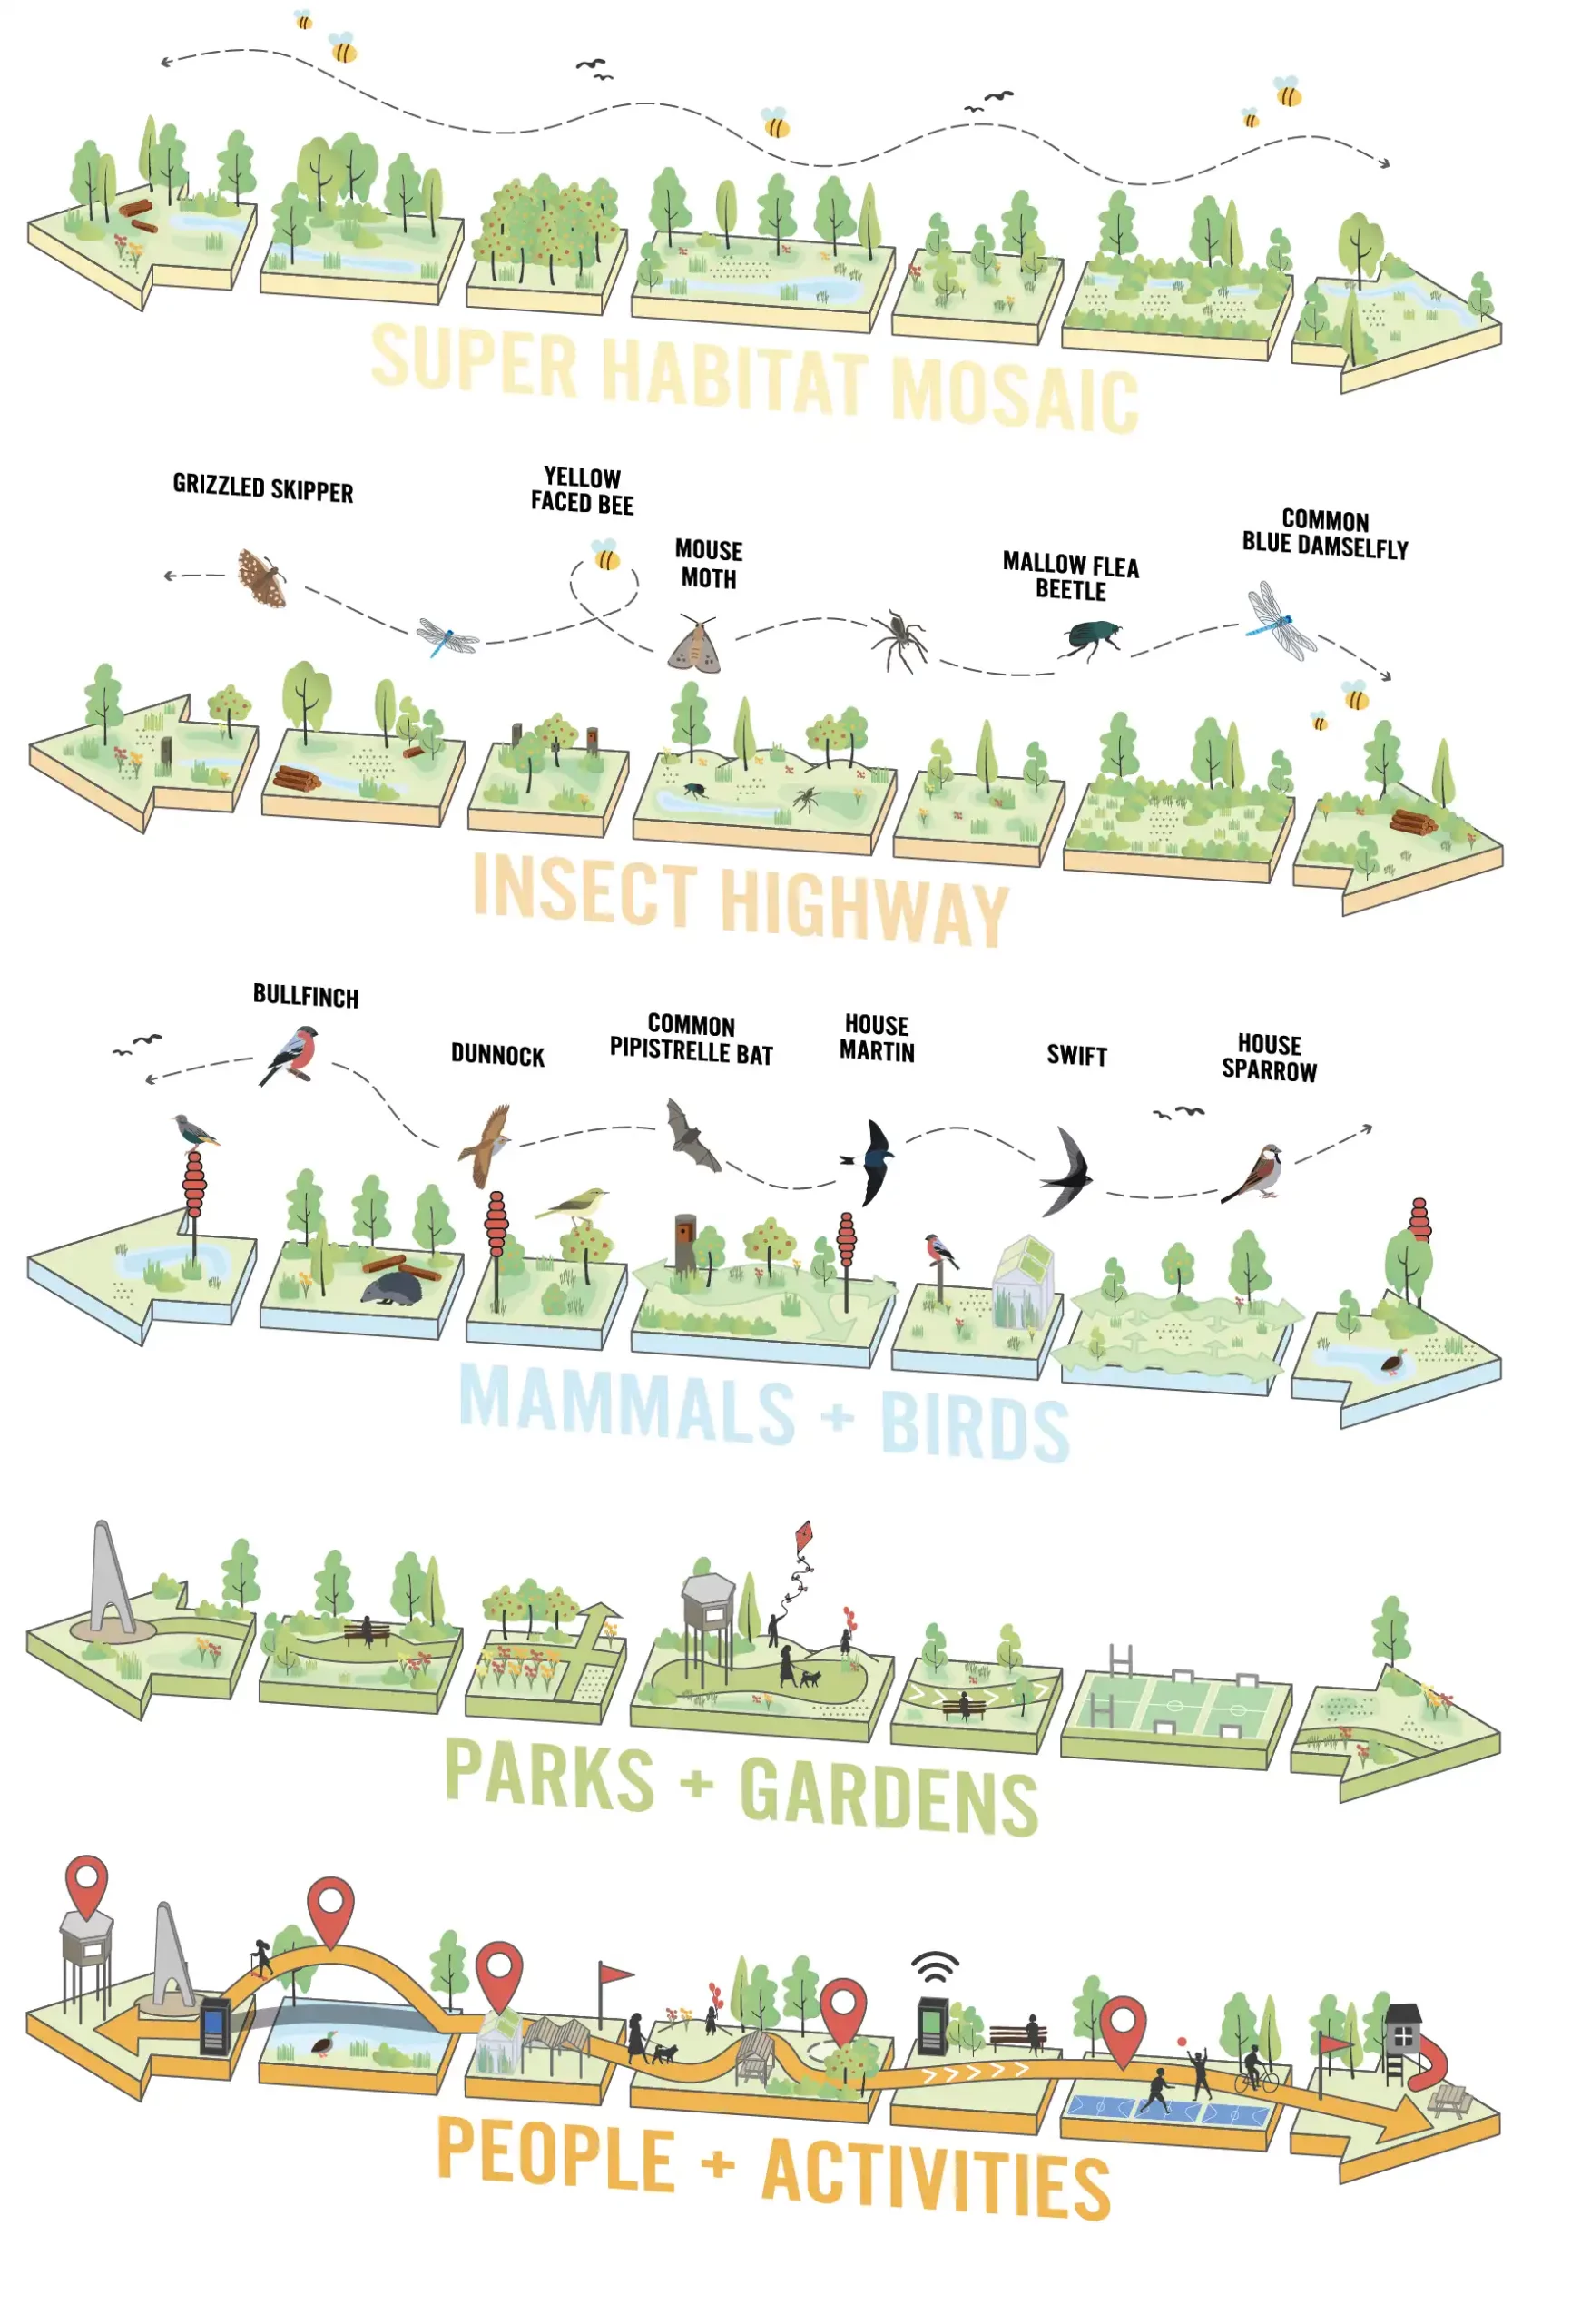 Diagram showing the 5 different conceptual layers in Runway Park: super habitat mosaic; insect highway; mammals and birds; parks and gardens; people and activities